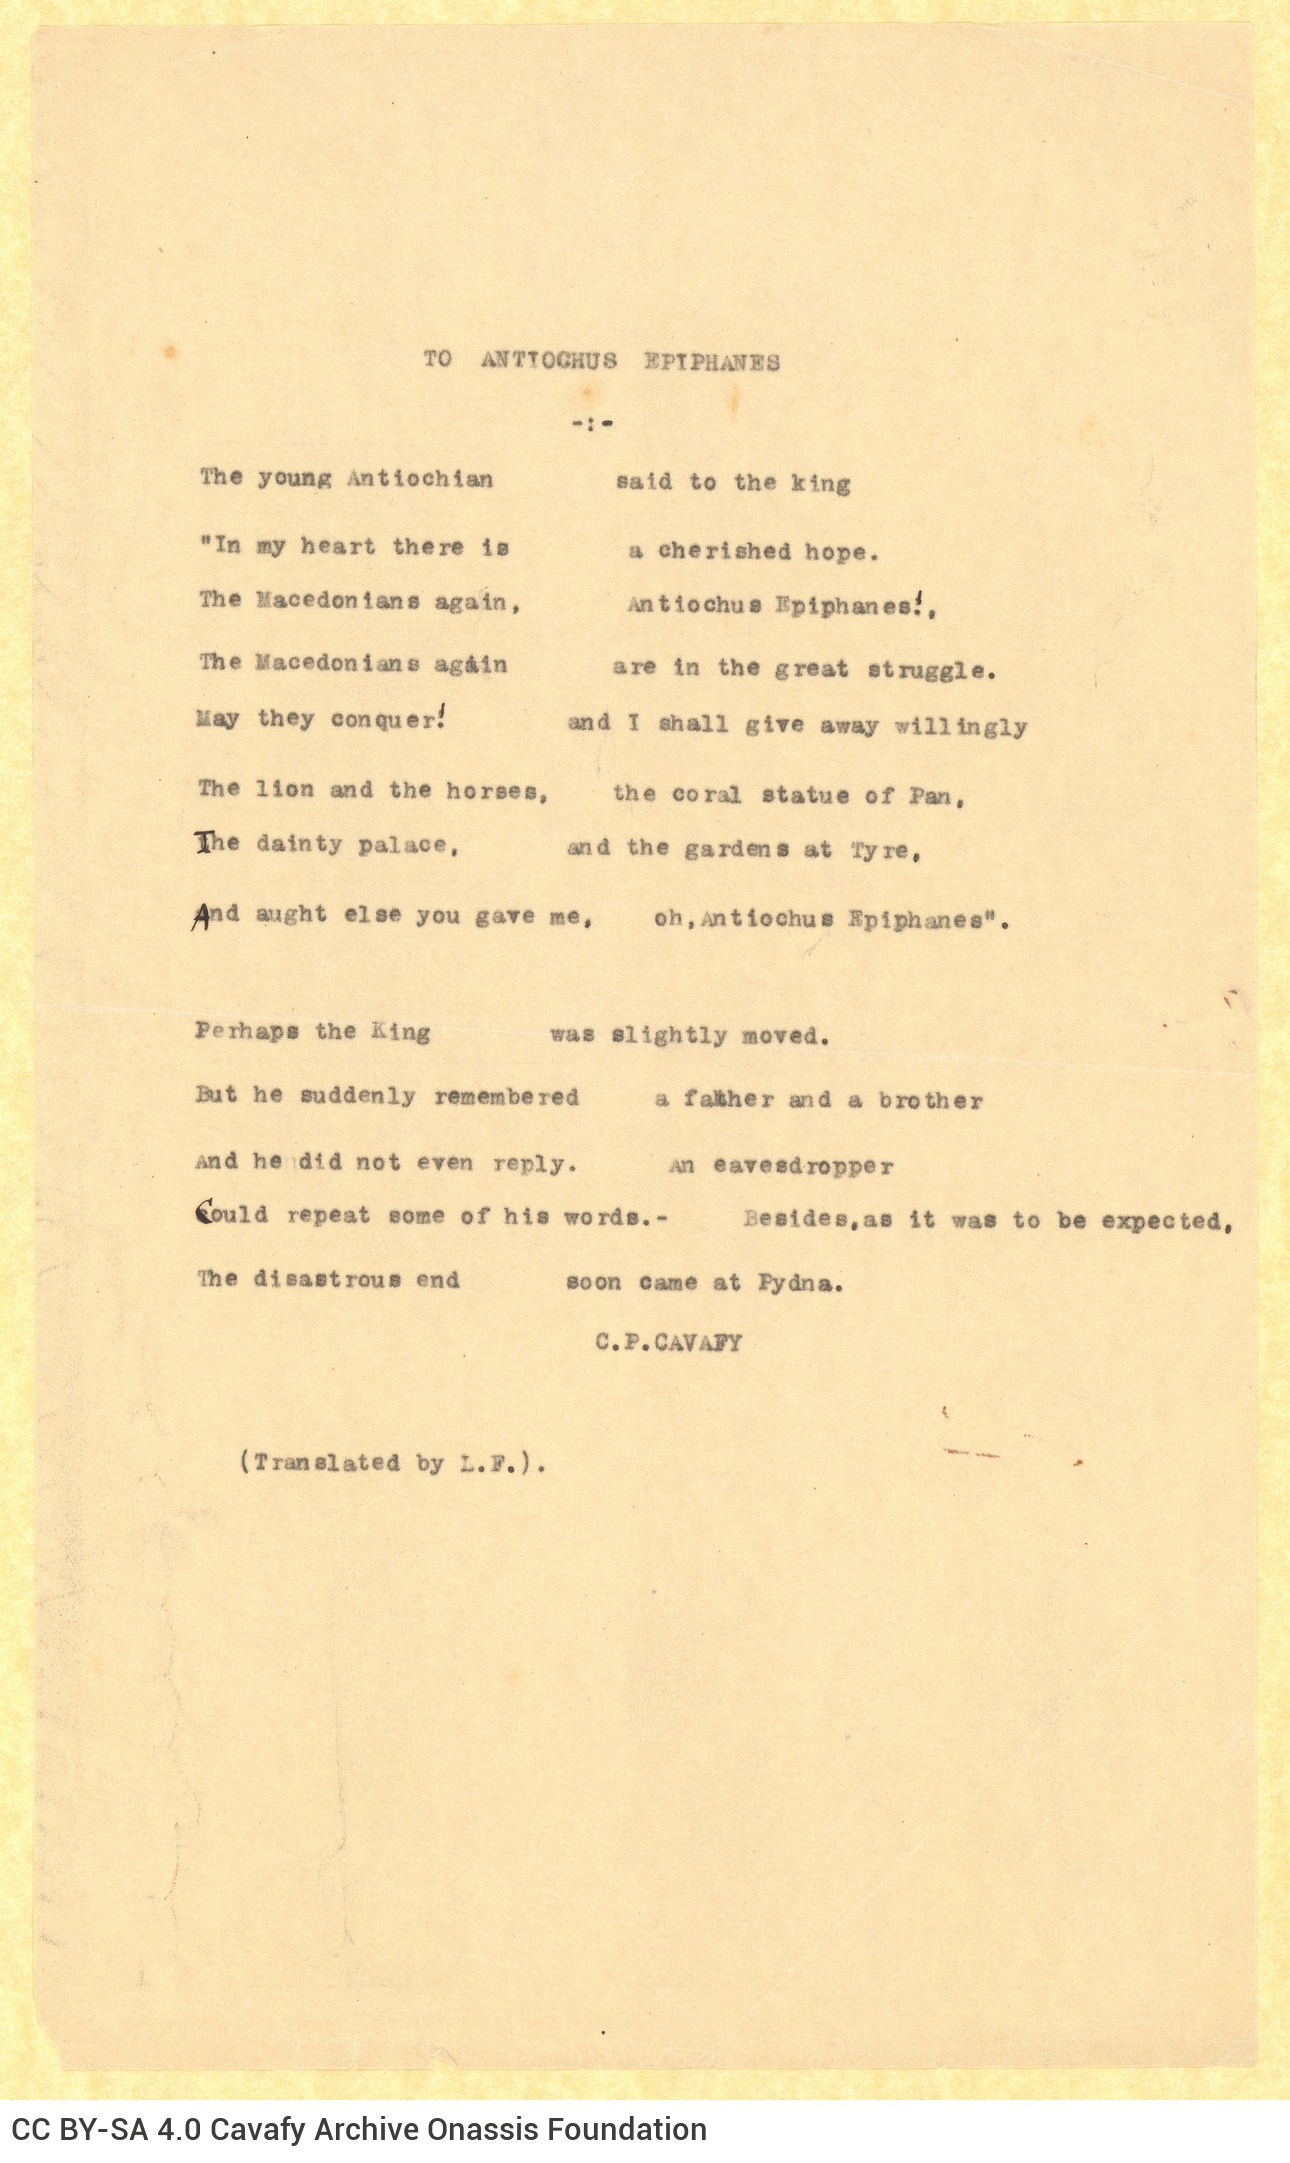 Typewritten English translation of the poem "For Antiochus Epiphanes". The poem is found twice, on a broadsheet and on the fi